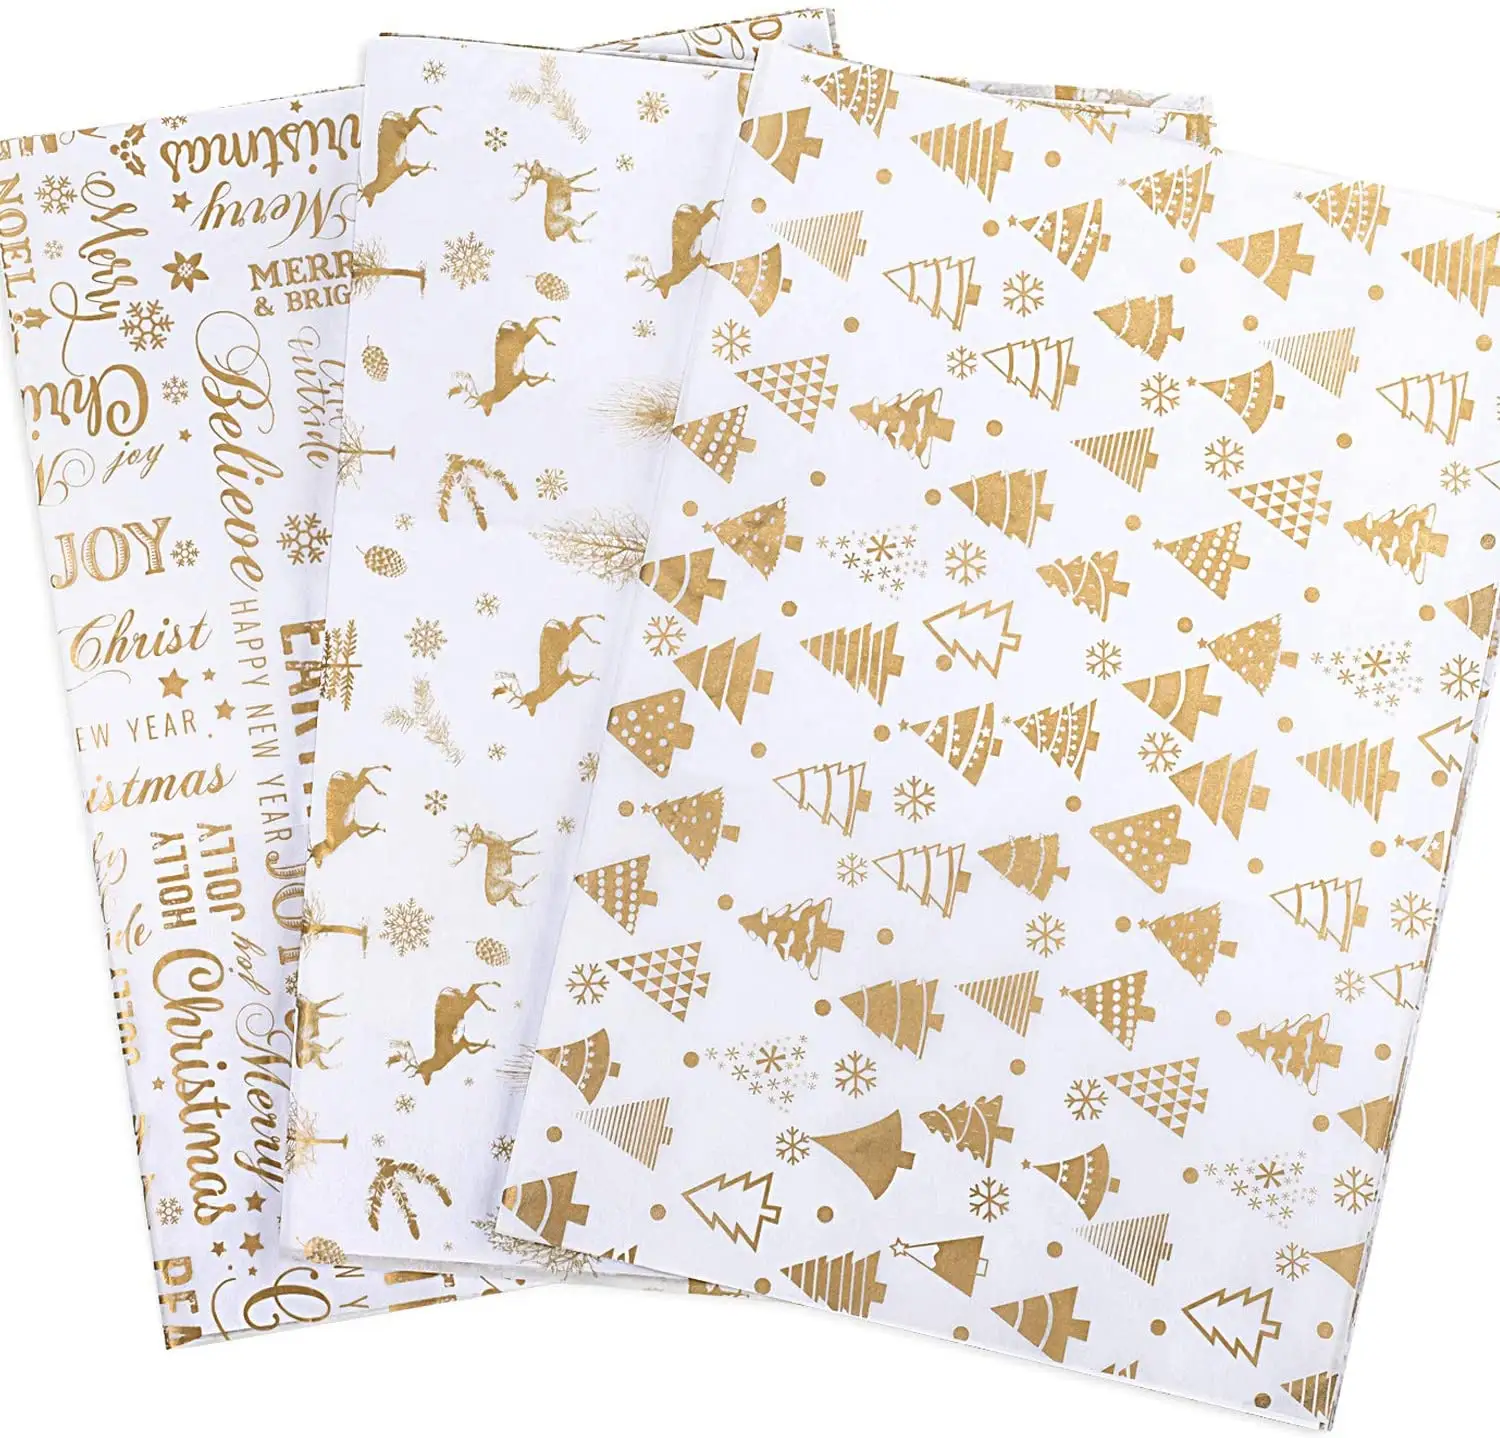 Exquisite Christmas Gold Gift Tissue Wrap Paper Xmas Tree Reindeer Snowflake Design for Holiday Wrapping Paper DIY and Craft